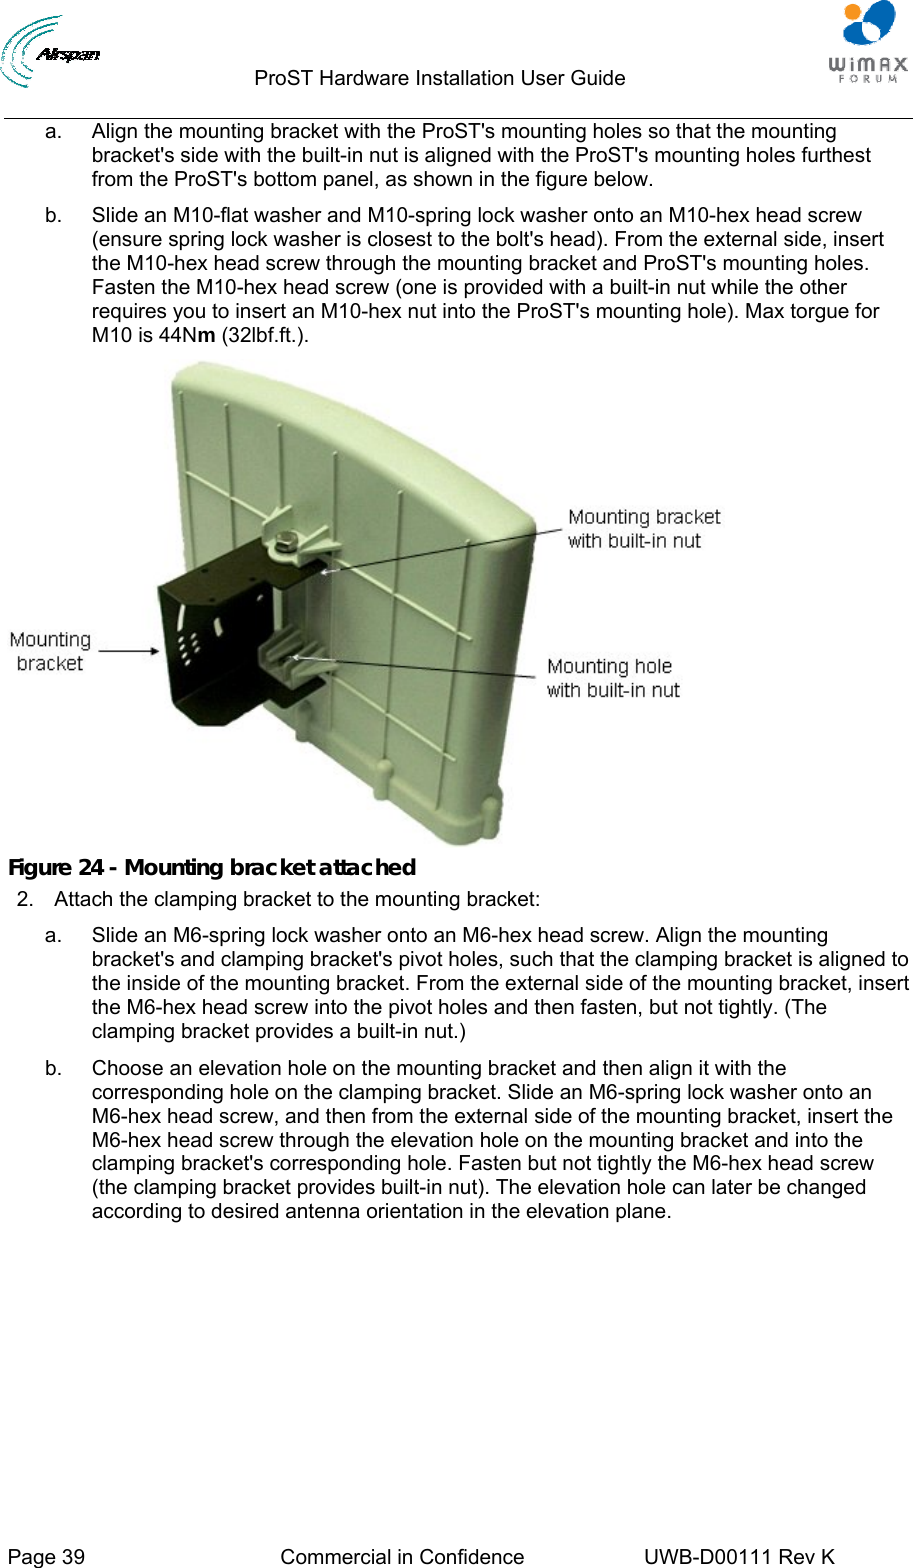                                  ProST Hardware Installation User Guide     Page 39  Commercial in Confidence  UWB-D00111 Rev K   a.  Align the mounting bracket with the ProST&apos;s mounting holes so that the mounting bracket&apos;s side with the built-in nut is aligned with the ProST&apos;s mounting holes furthest from the ProST&apos;s bottom panel, as shown in the figure below. b.  Slide an M10-flat washer and M10-spring lock washer onto an M10-hex head screw (ensure spring lock washer is closest to the bolt&apos;s head). From the external side, insert the M10-hex head screw through the mounting bracket and ProST&apos;s mounting holes. Fasten the M10-hex head screw (one is provided with a built-in nut while the other requires you to insert an M10-hex nut into the ProST&apos;s mounting hole). Max torgue for M10 is 44Nm (32lbf.ft.).  Figure 24 - Mounting bracket attached 2.  Attach the clamping bracket to the mounting bracket: a.  Slide an M6-spring lock washer onto an M6-hex head screw. Align the mounting bracket&apos;s and clamping bracket&apos;s pivot holes, such that the clamping bracket is aligned to the inside of the mounting bracket. From the external side of the mounting bracket, insert the M6-hex head screw into the pivot holes and then fasten, but not tightly. (The clamping bracket provides a built-in nut.) b.  Choose an elevation hole on the mounting bracket and then align it with the corresponding hole on the clamping bracket. Slide an M6-spring lock washer onto an M6-hex head screw, and then from the external side of the mounting bracket, insert the M6-hex head screw through the elevation hole on the mounting bracket and into the clamping bracket&apos;s corresponding hole. Fasten but not tightly the M6-hex head screw (the clamping bracket provides built-in nut). The elevation hole can later be changed according to desired antenna orientation in the elevation plane. 